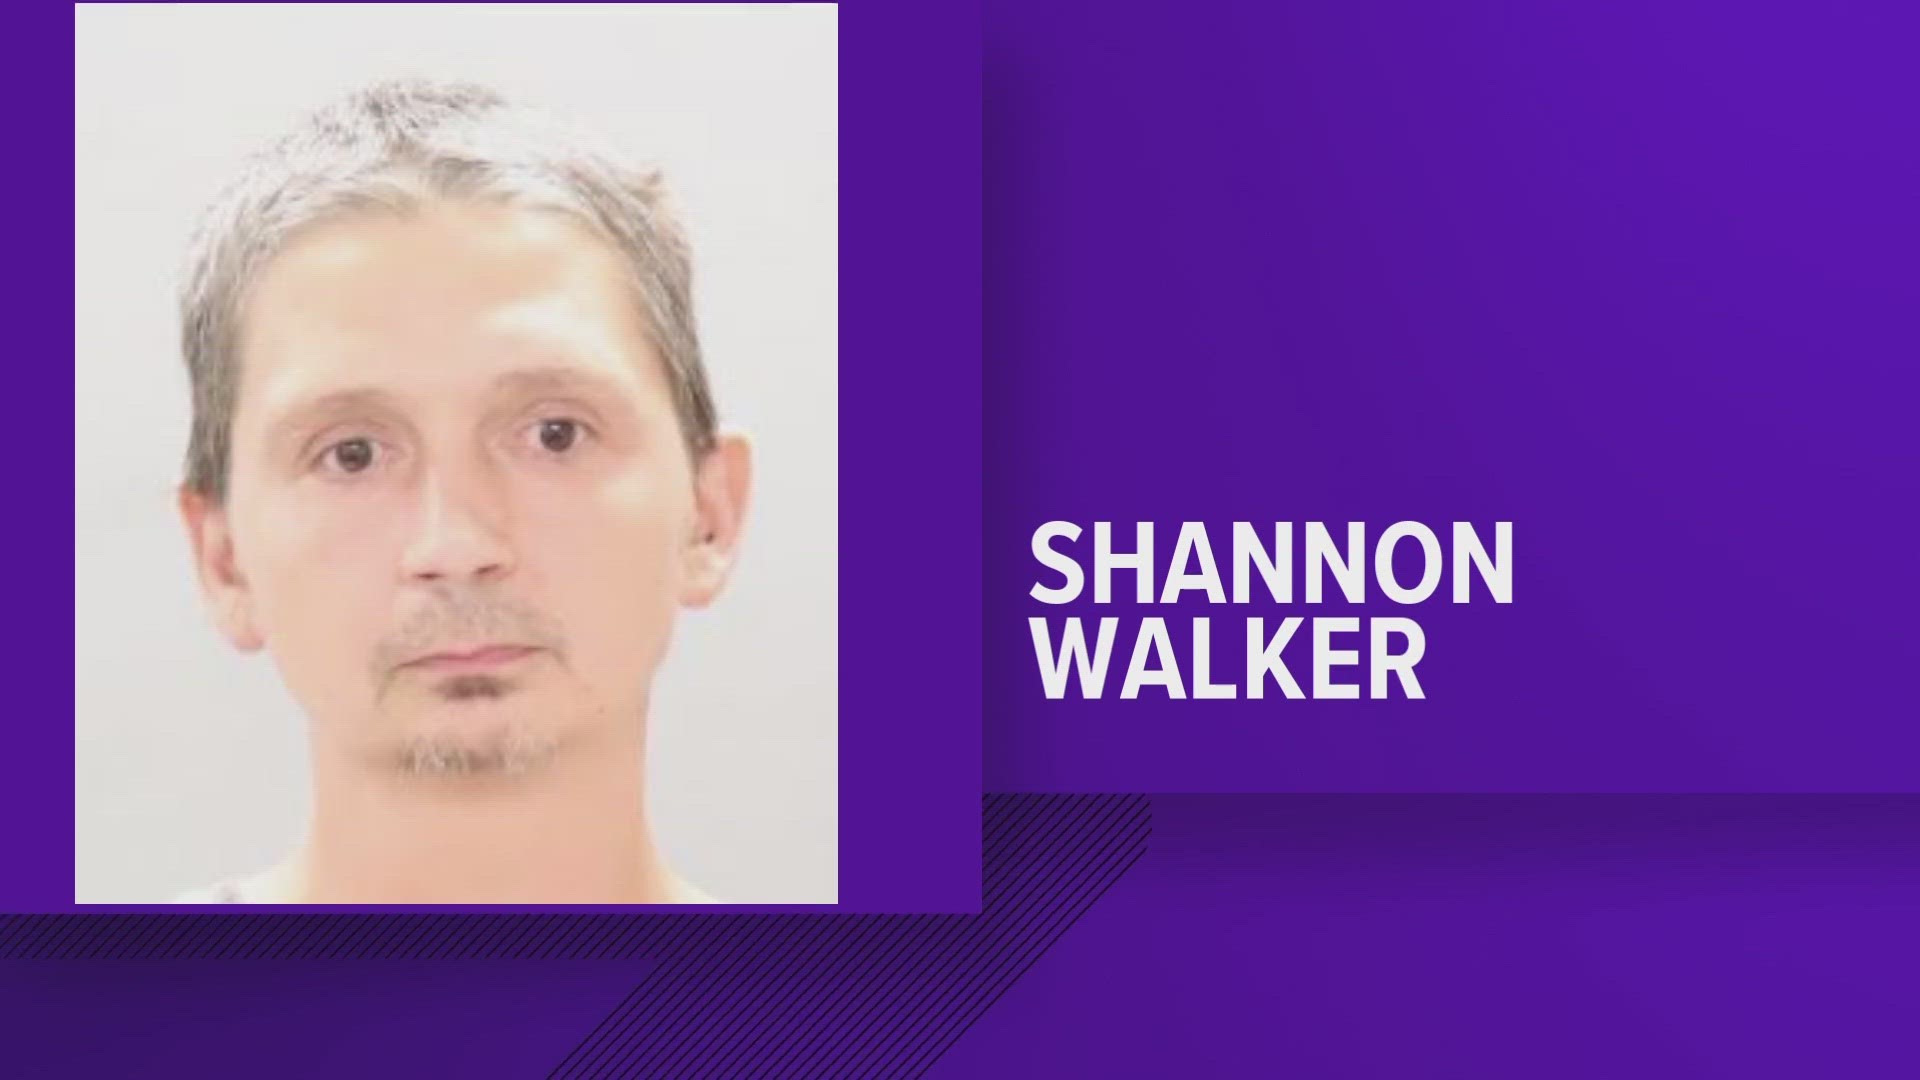 KPD said 44-year-old Shannon Walker has been charged with vehicular homicide and DUI among other charges stemming from the crash.